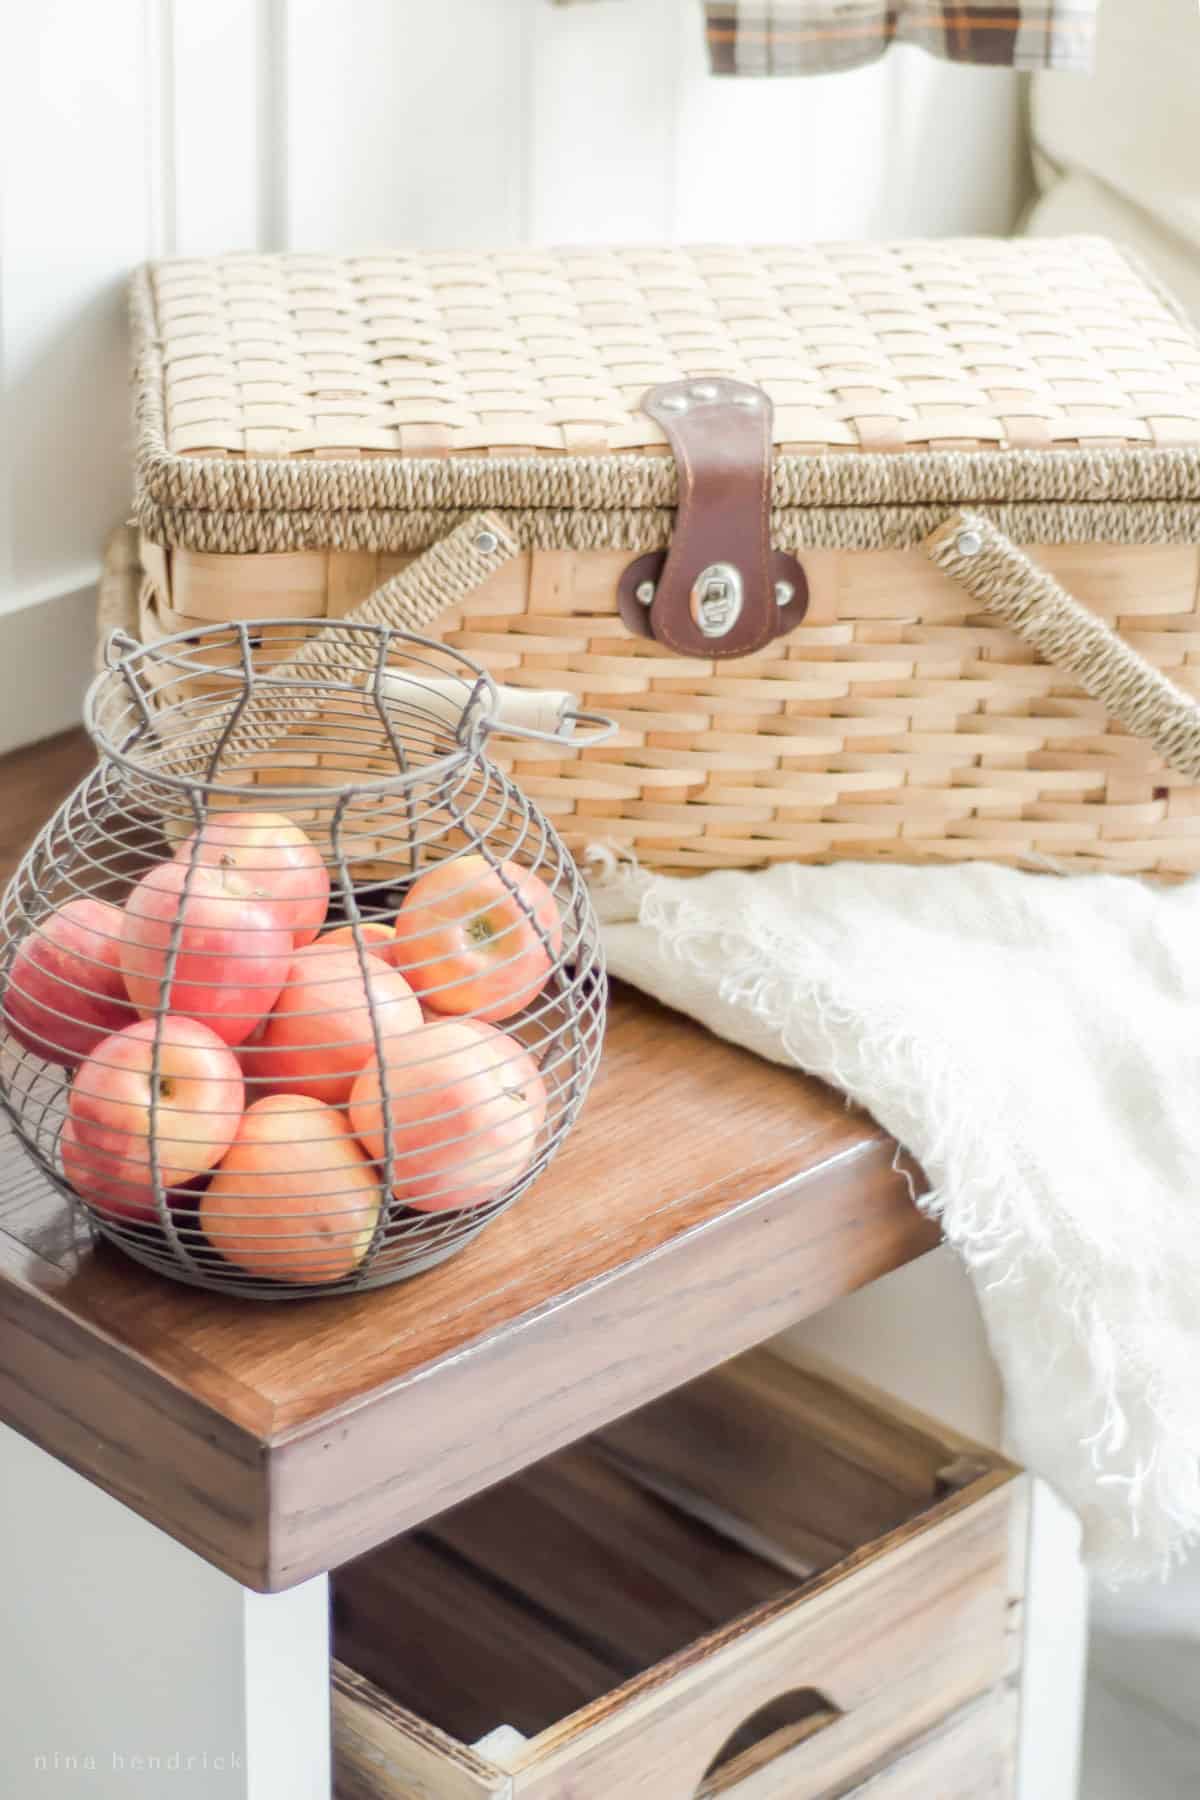 A wicker basket sits on a bench next to apples, adding a cozy touch to the fall home tour.